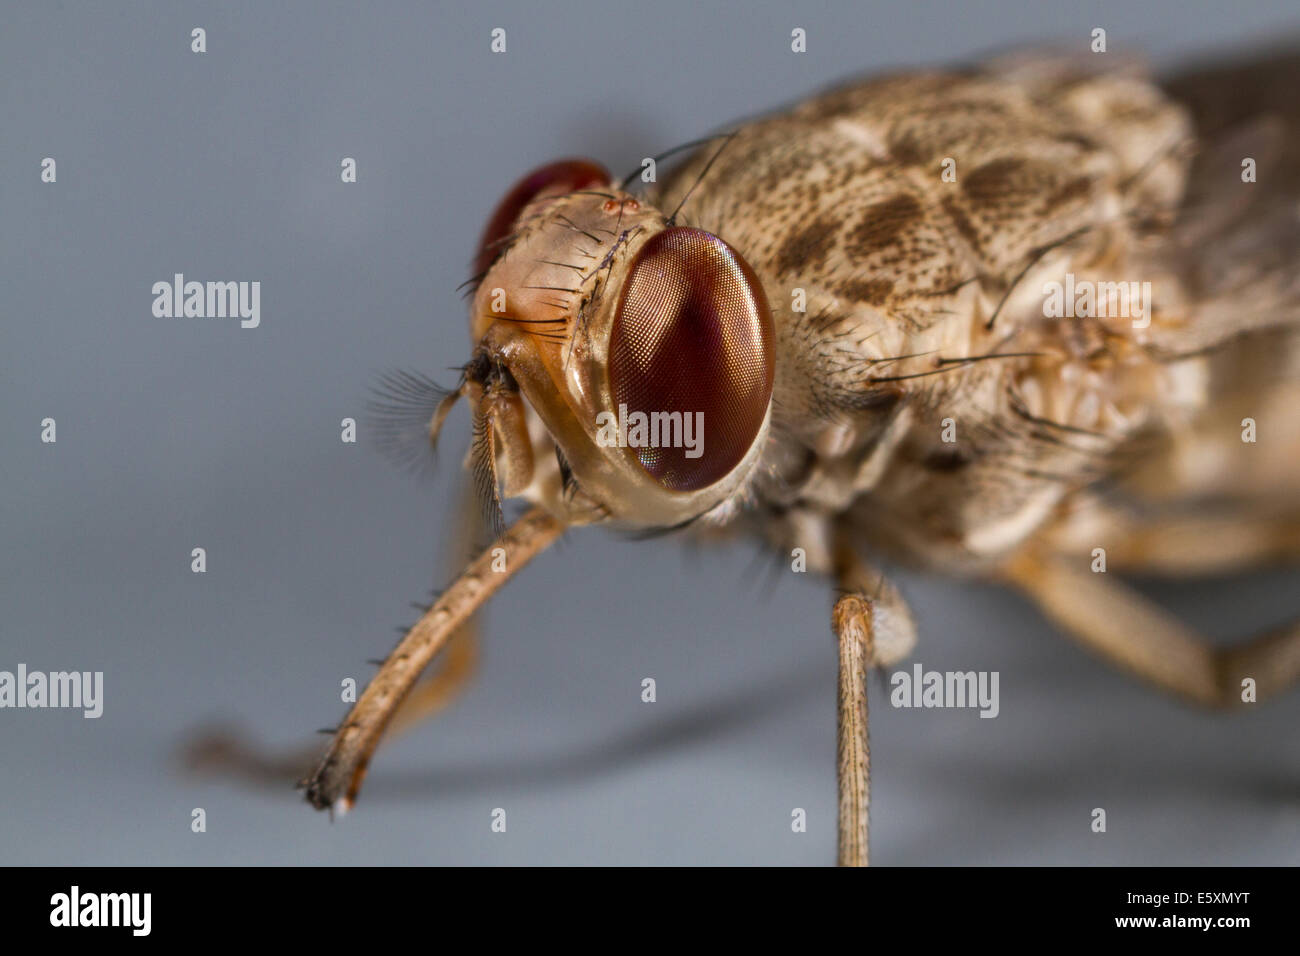 Savannah Tsetse fly (Glossina morsitans) about 15 minutes post-eclosion with almost fully receded ptilinum Stock Photo